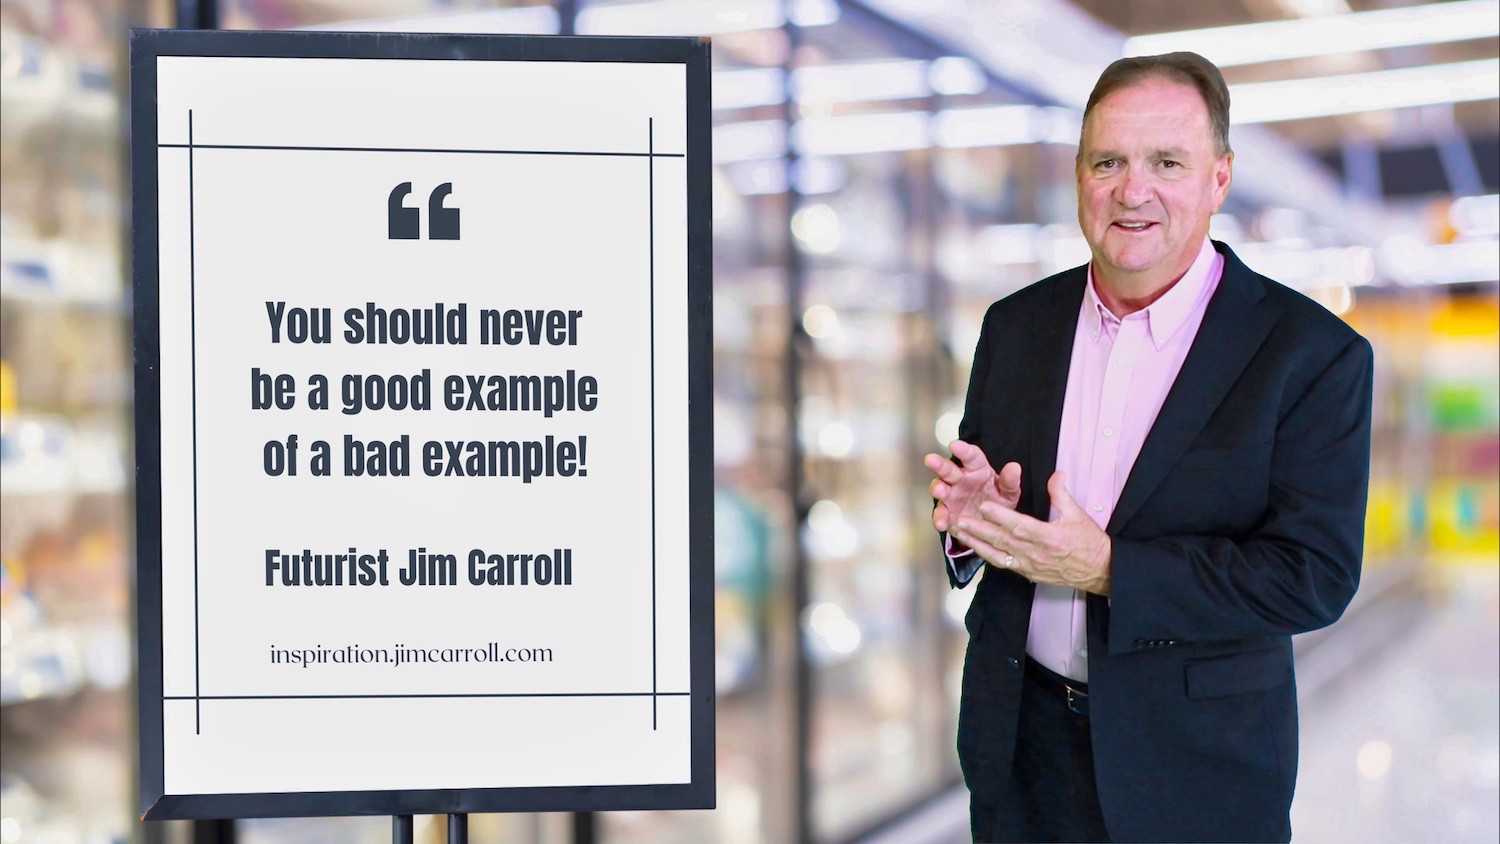 "You should never be a good example of a bad example!" - Futurist Jim Carroll